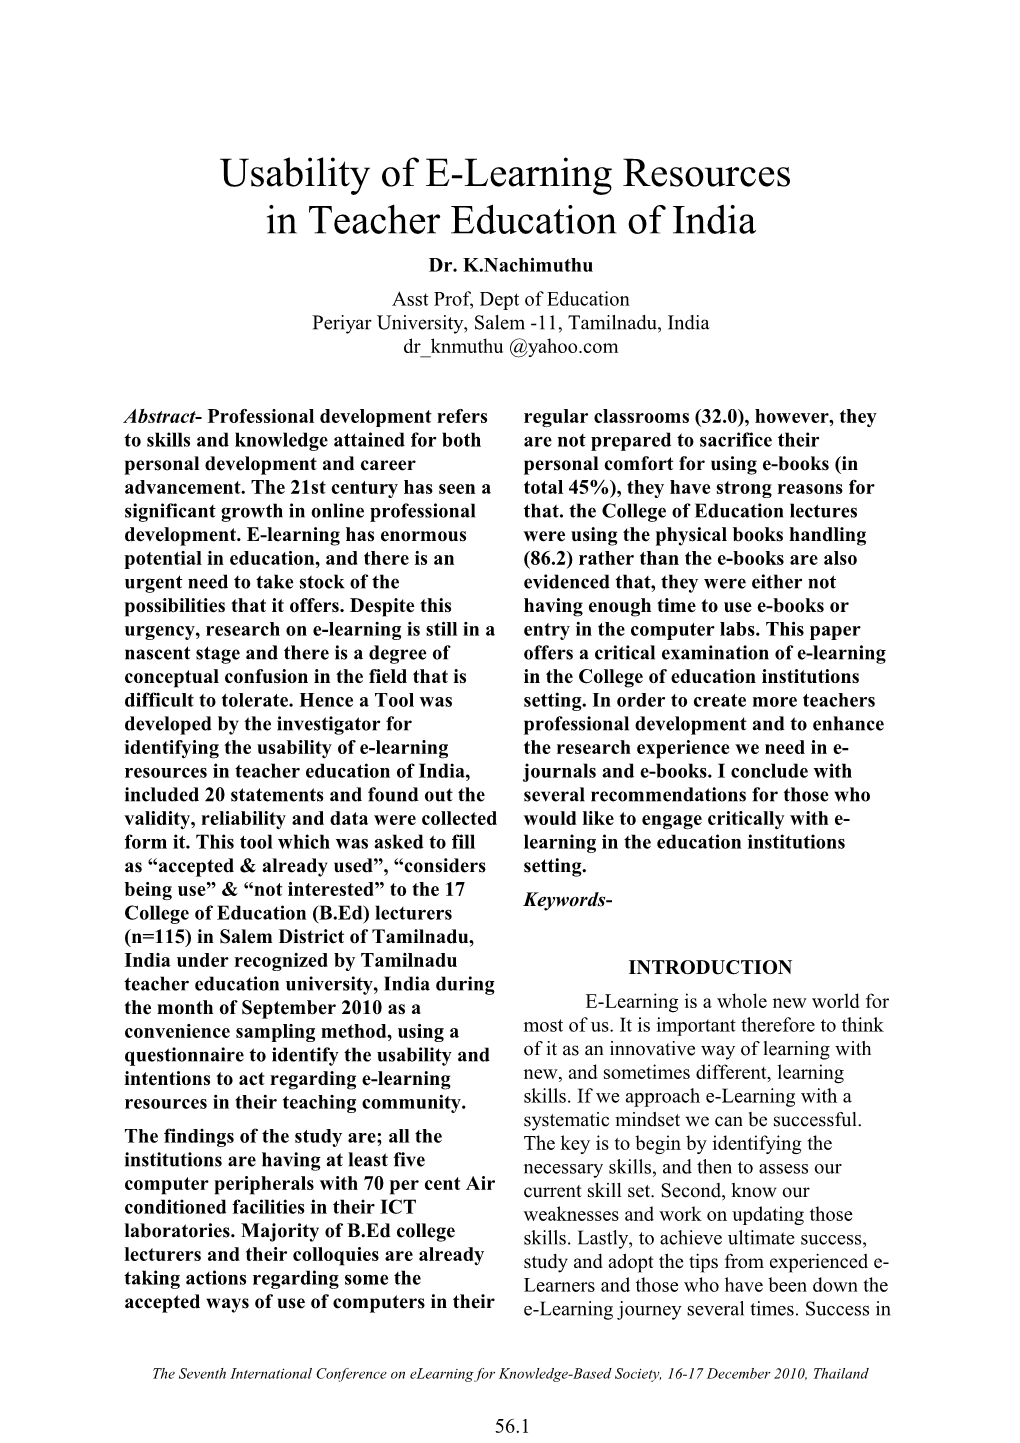 Usability of E-Learning Resources in Teacher Education of India